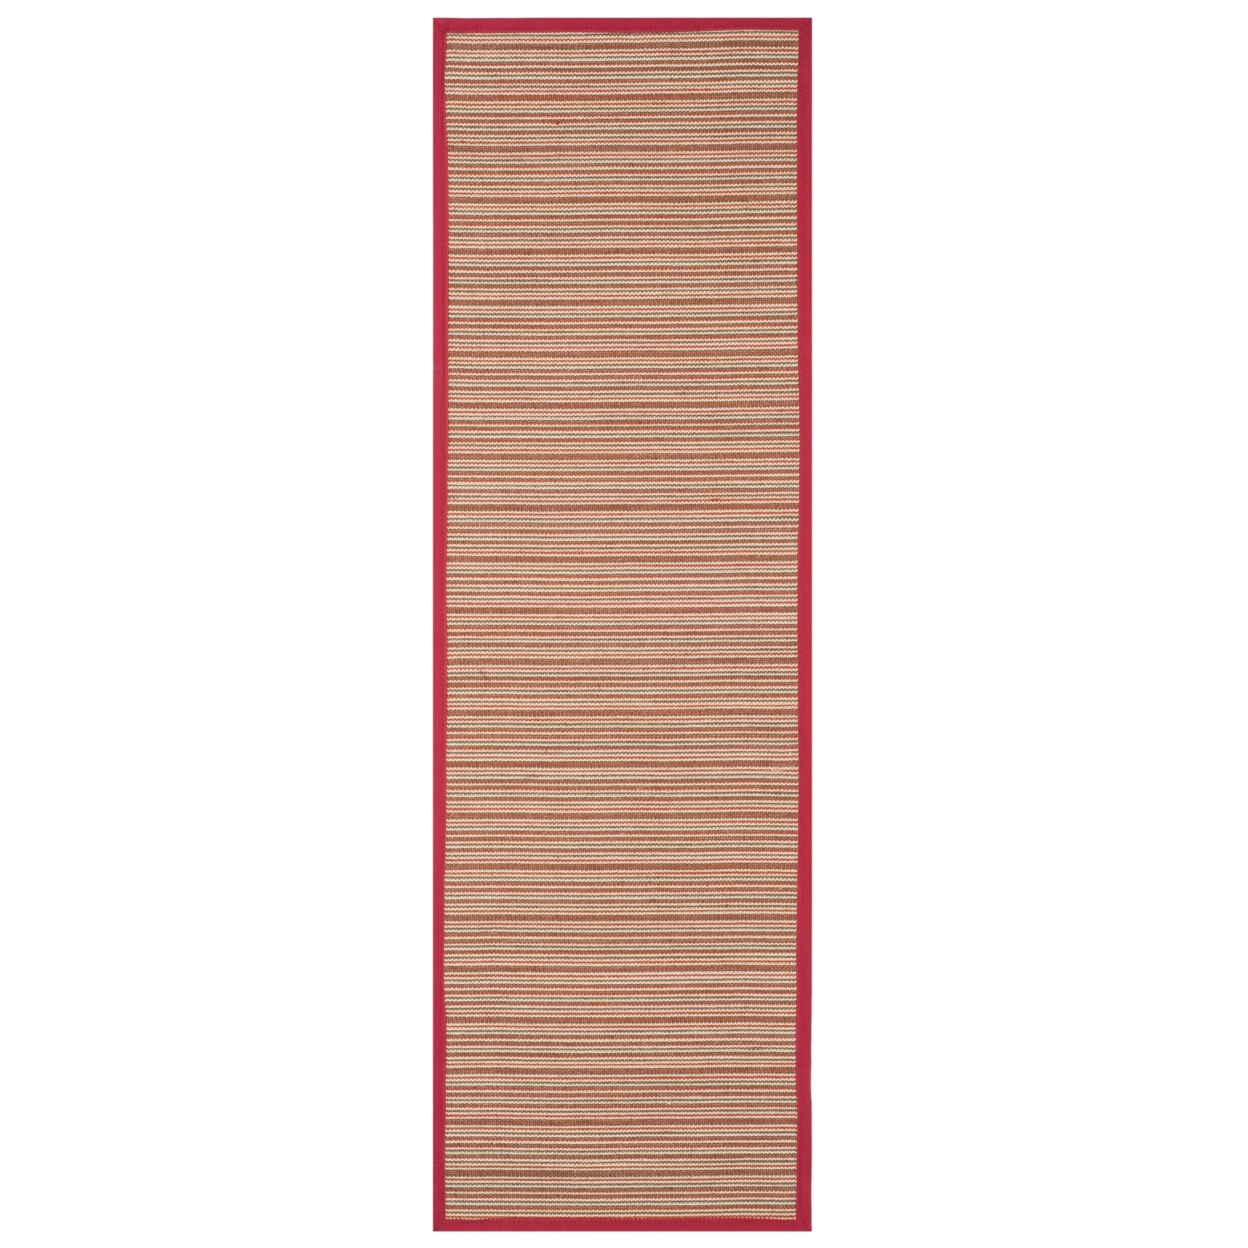 SAFAVIEH Natural Fiber Collection NF132B Brown / Red Rug - 2' 6 X 8'